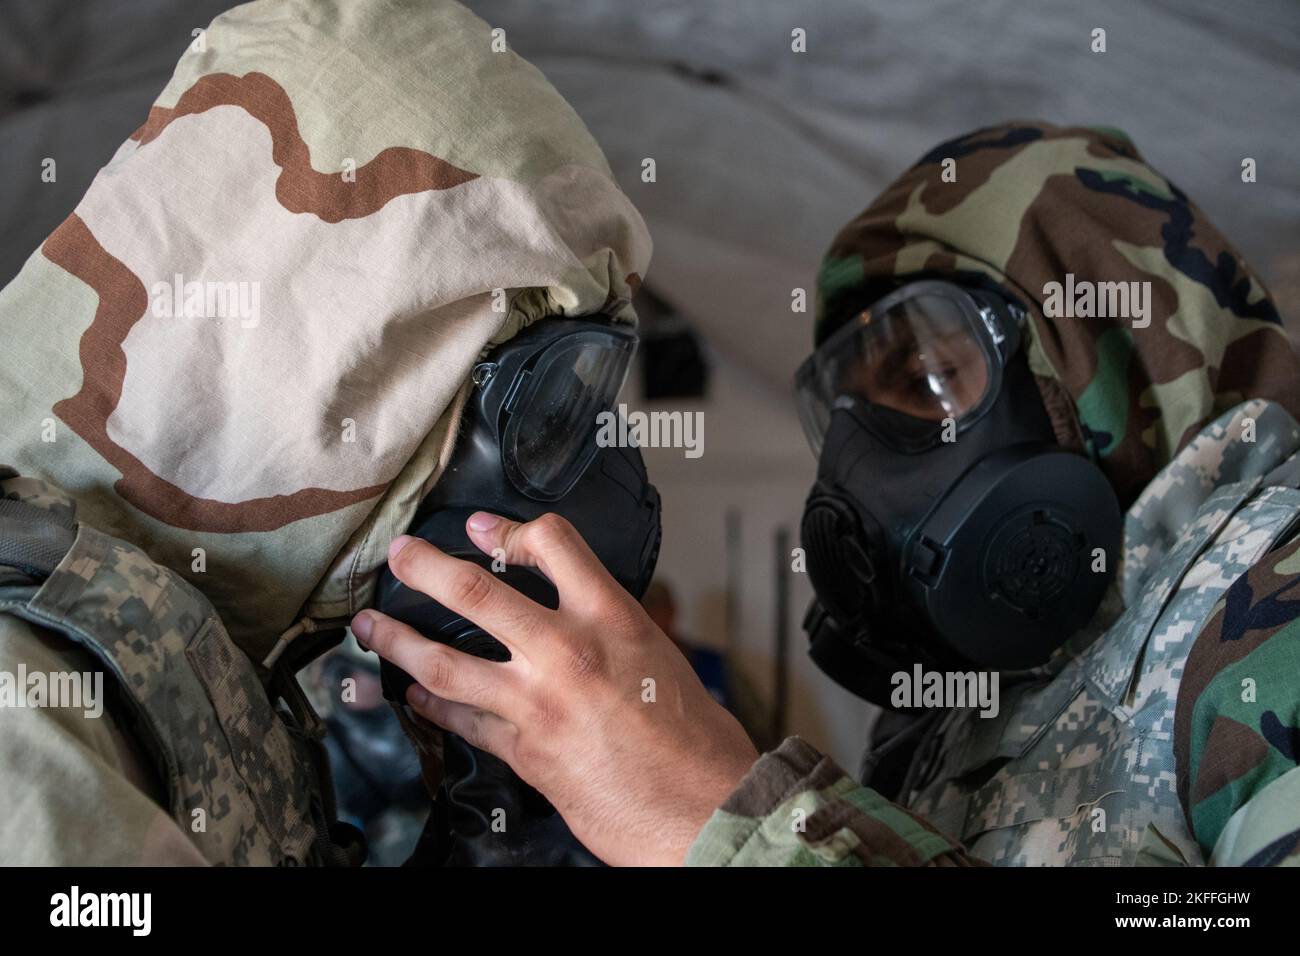 U.S. Air Force 509th Bomb Wing Security Forces members check equipment during a Chemical, Biological, Radiological, Nuclear exercise at Whiteman Air Force Base, Missouri, Sept. 14, 2022. Airmen routinely check their CBRN equipment to validate its operability. Stock Photo